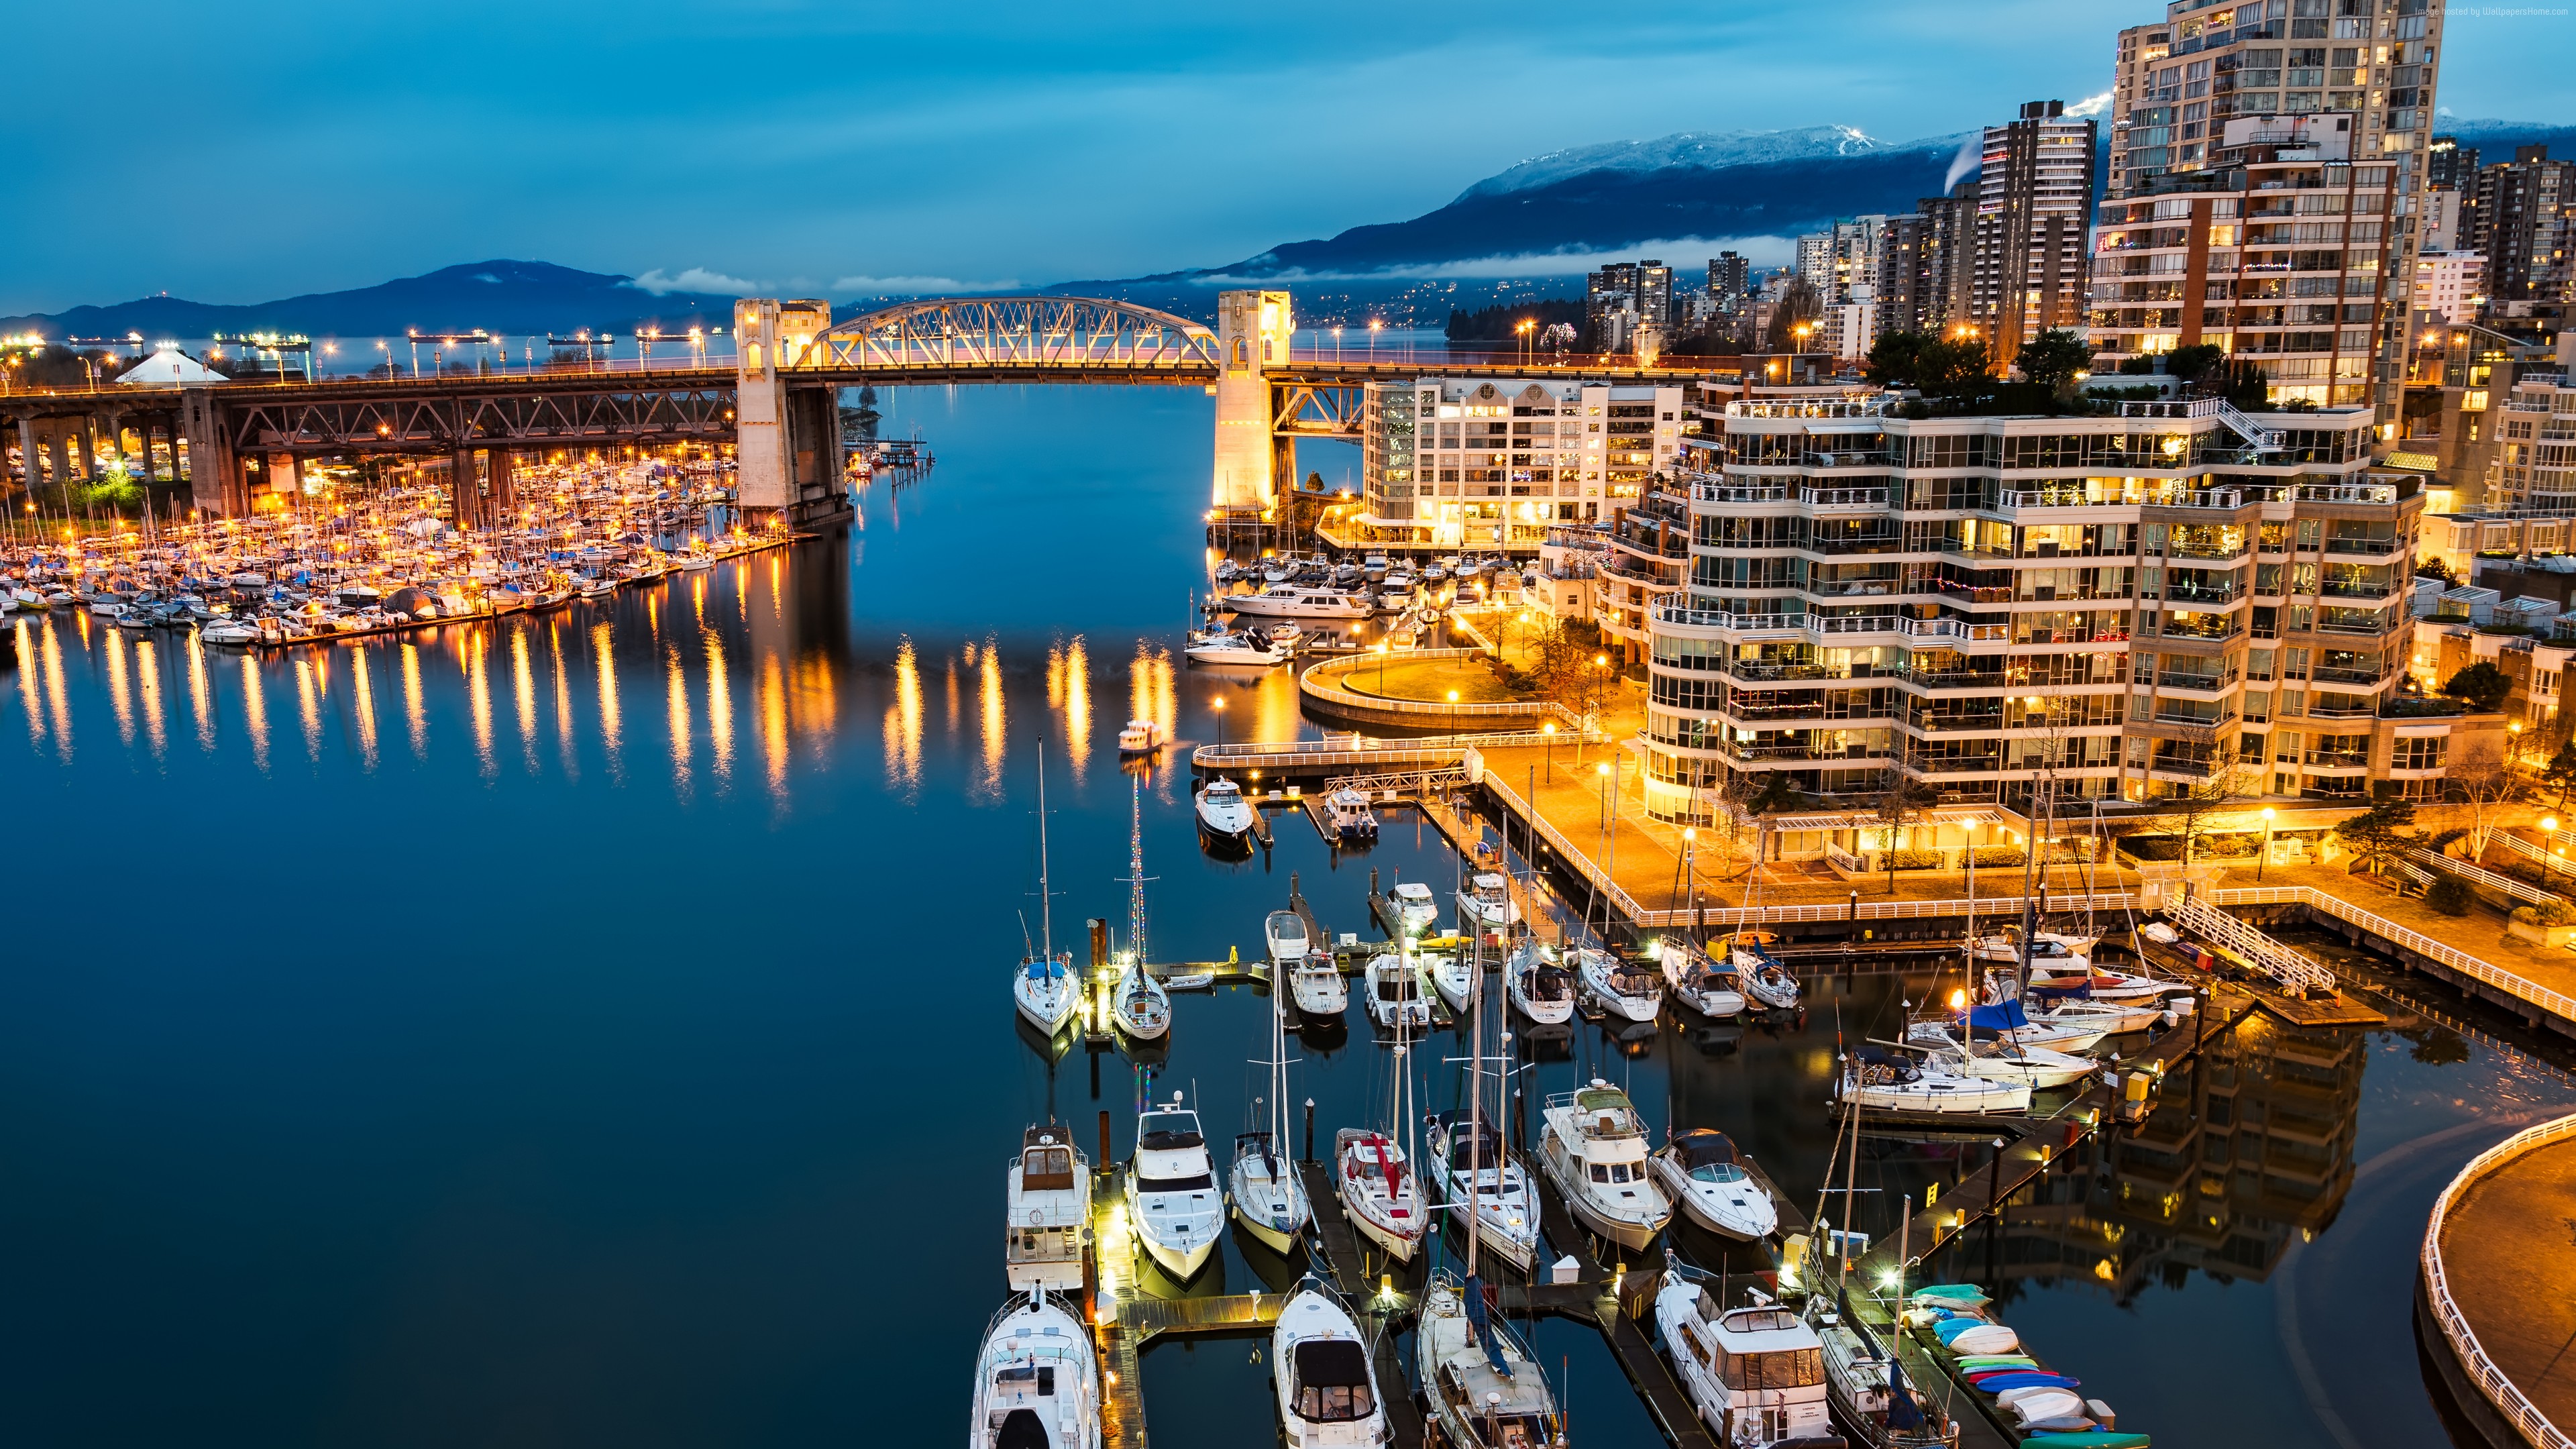 Wallpaper Vancouver, Granville, Island, Canada, night, Morning, lights, boats, blue, water, sea, travel, Architecture